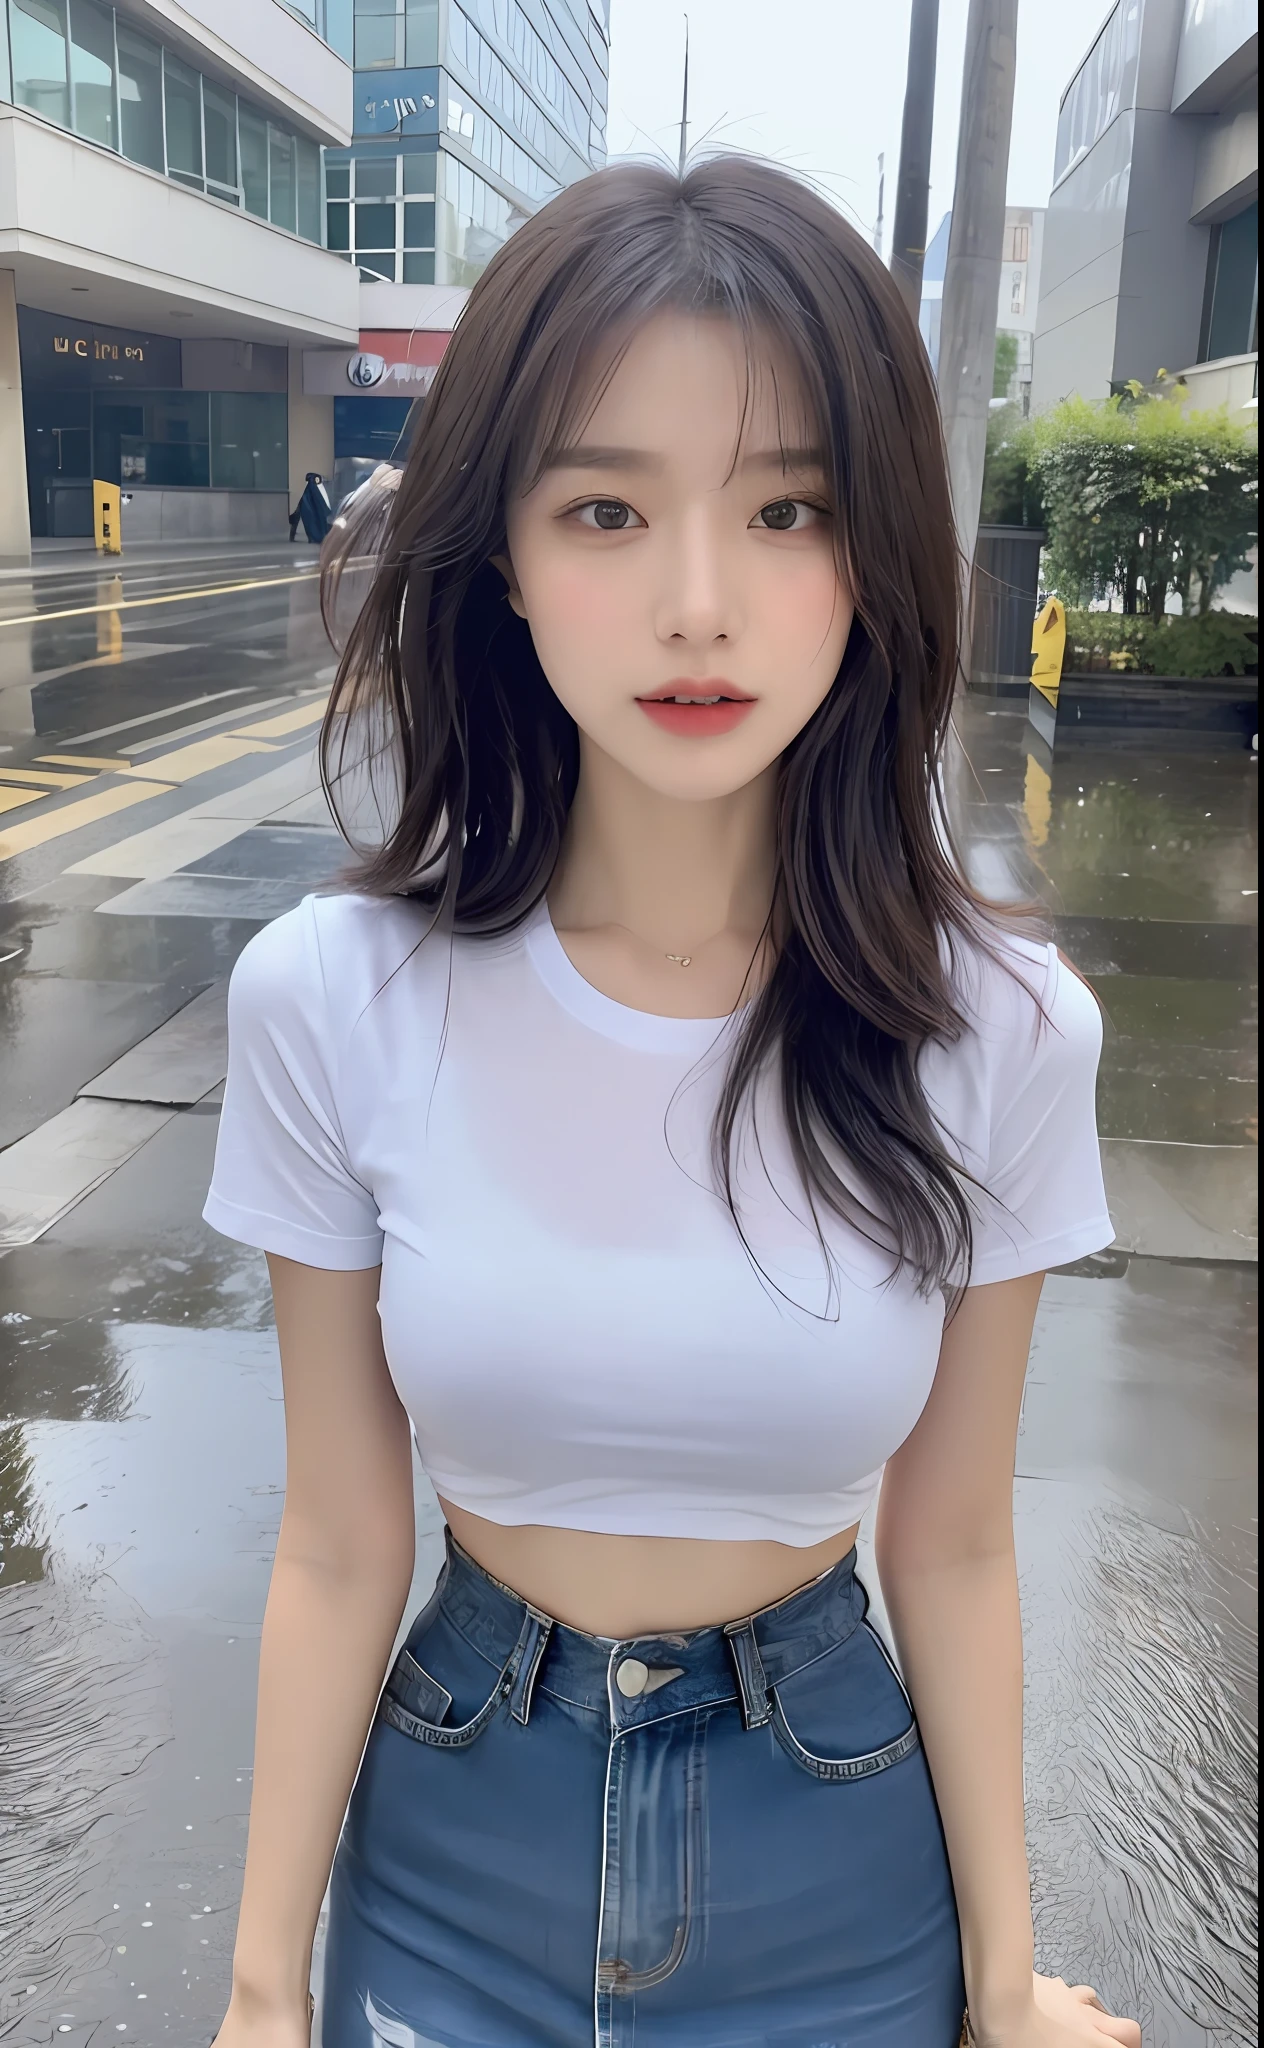 ((Best Quality, 8K, Masterpiece:1.3)), Focus:1.2, Perfect Body Beauty:1.4, Buttocks:1.2, (Layered Haircut, Breasts:1.2)), (Wet Clothes:1.1) , (Rain, Street:1.3), Loose Crop Top T-shirt: 1.1, Pleuffle skirt, highly detailed face and skin texture, Delicate eyes, Double eyelids, whitening skin, long hair, (Shut up: 1.3),